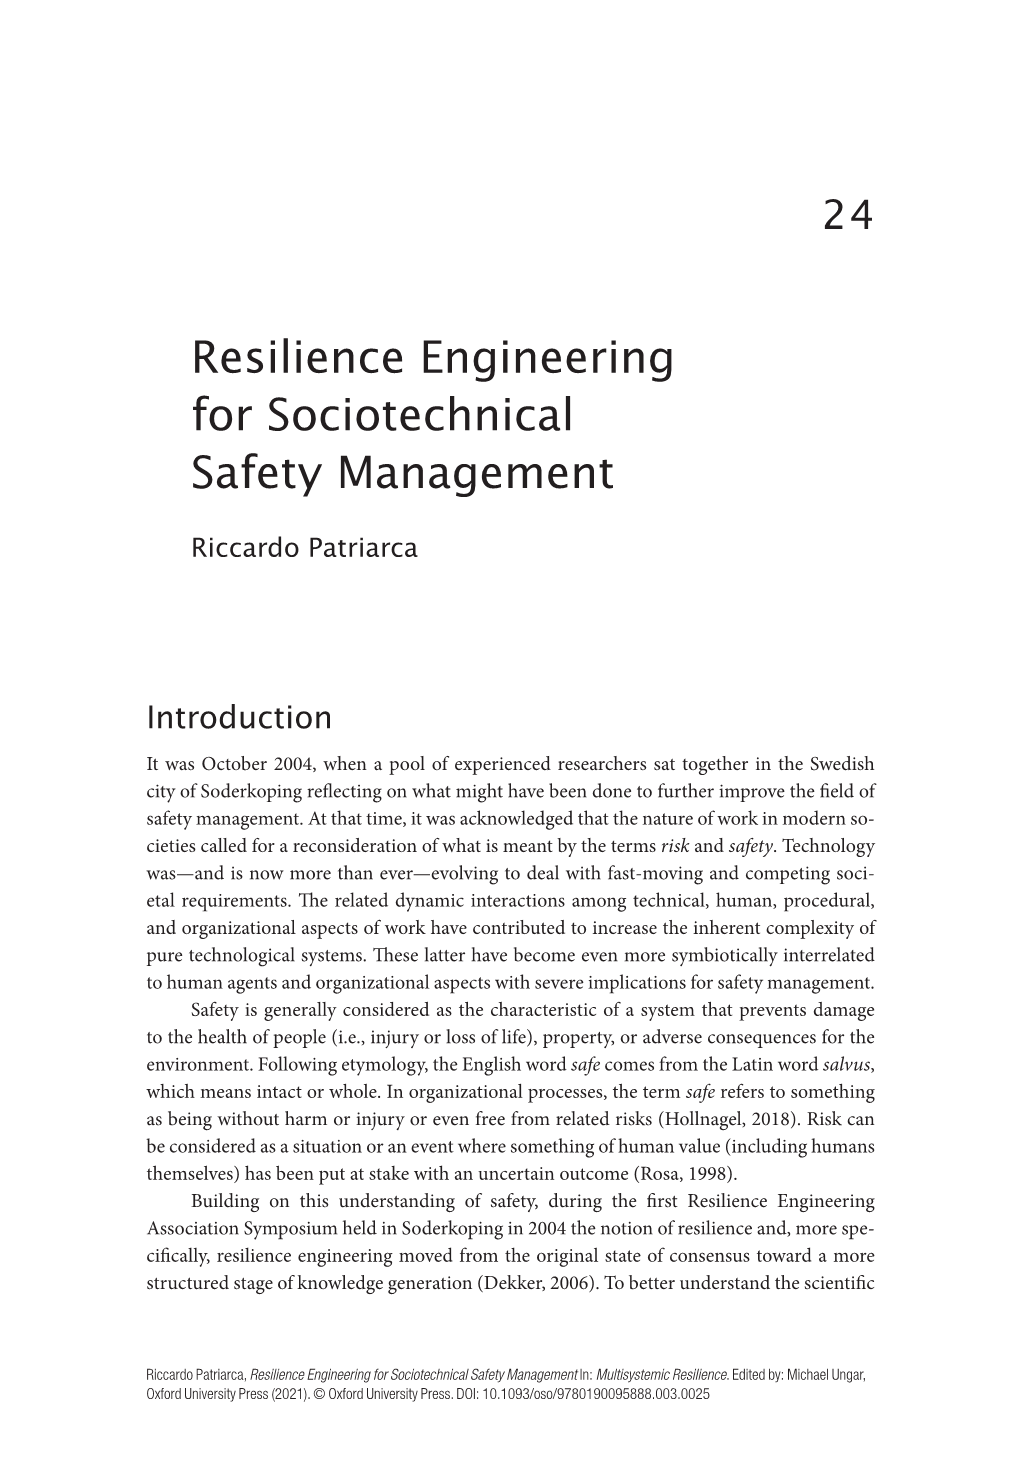 Resilience Engineering for Sociotechnical Safety Management